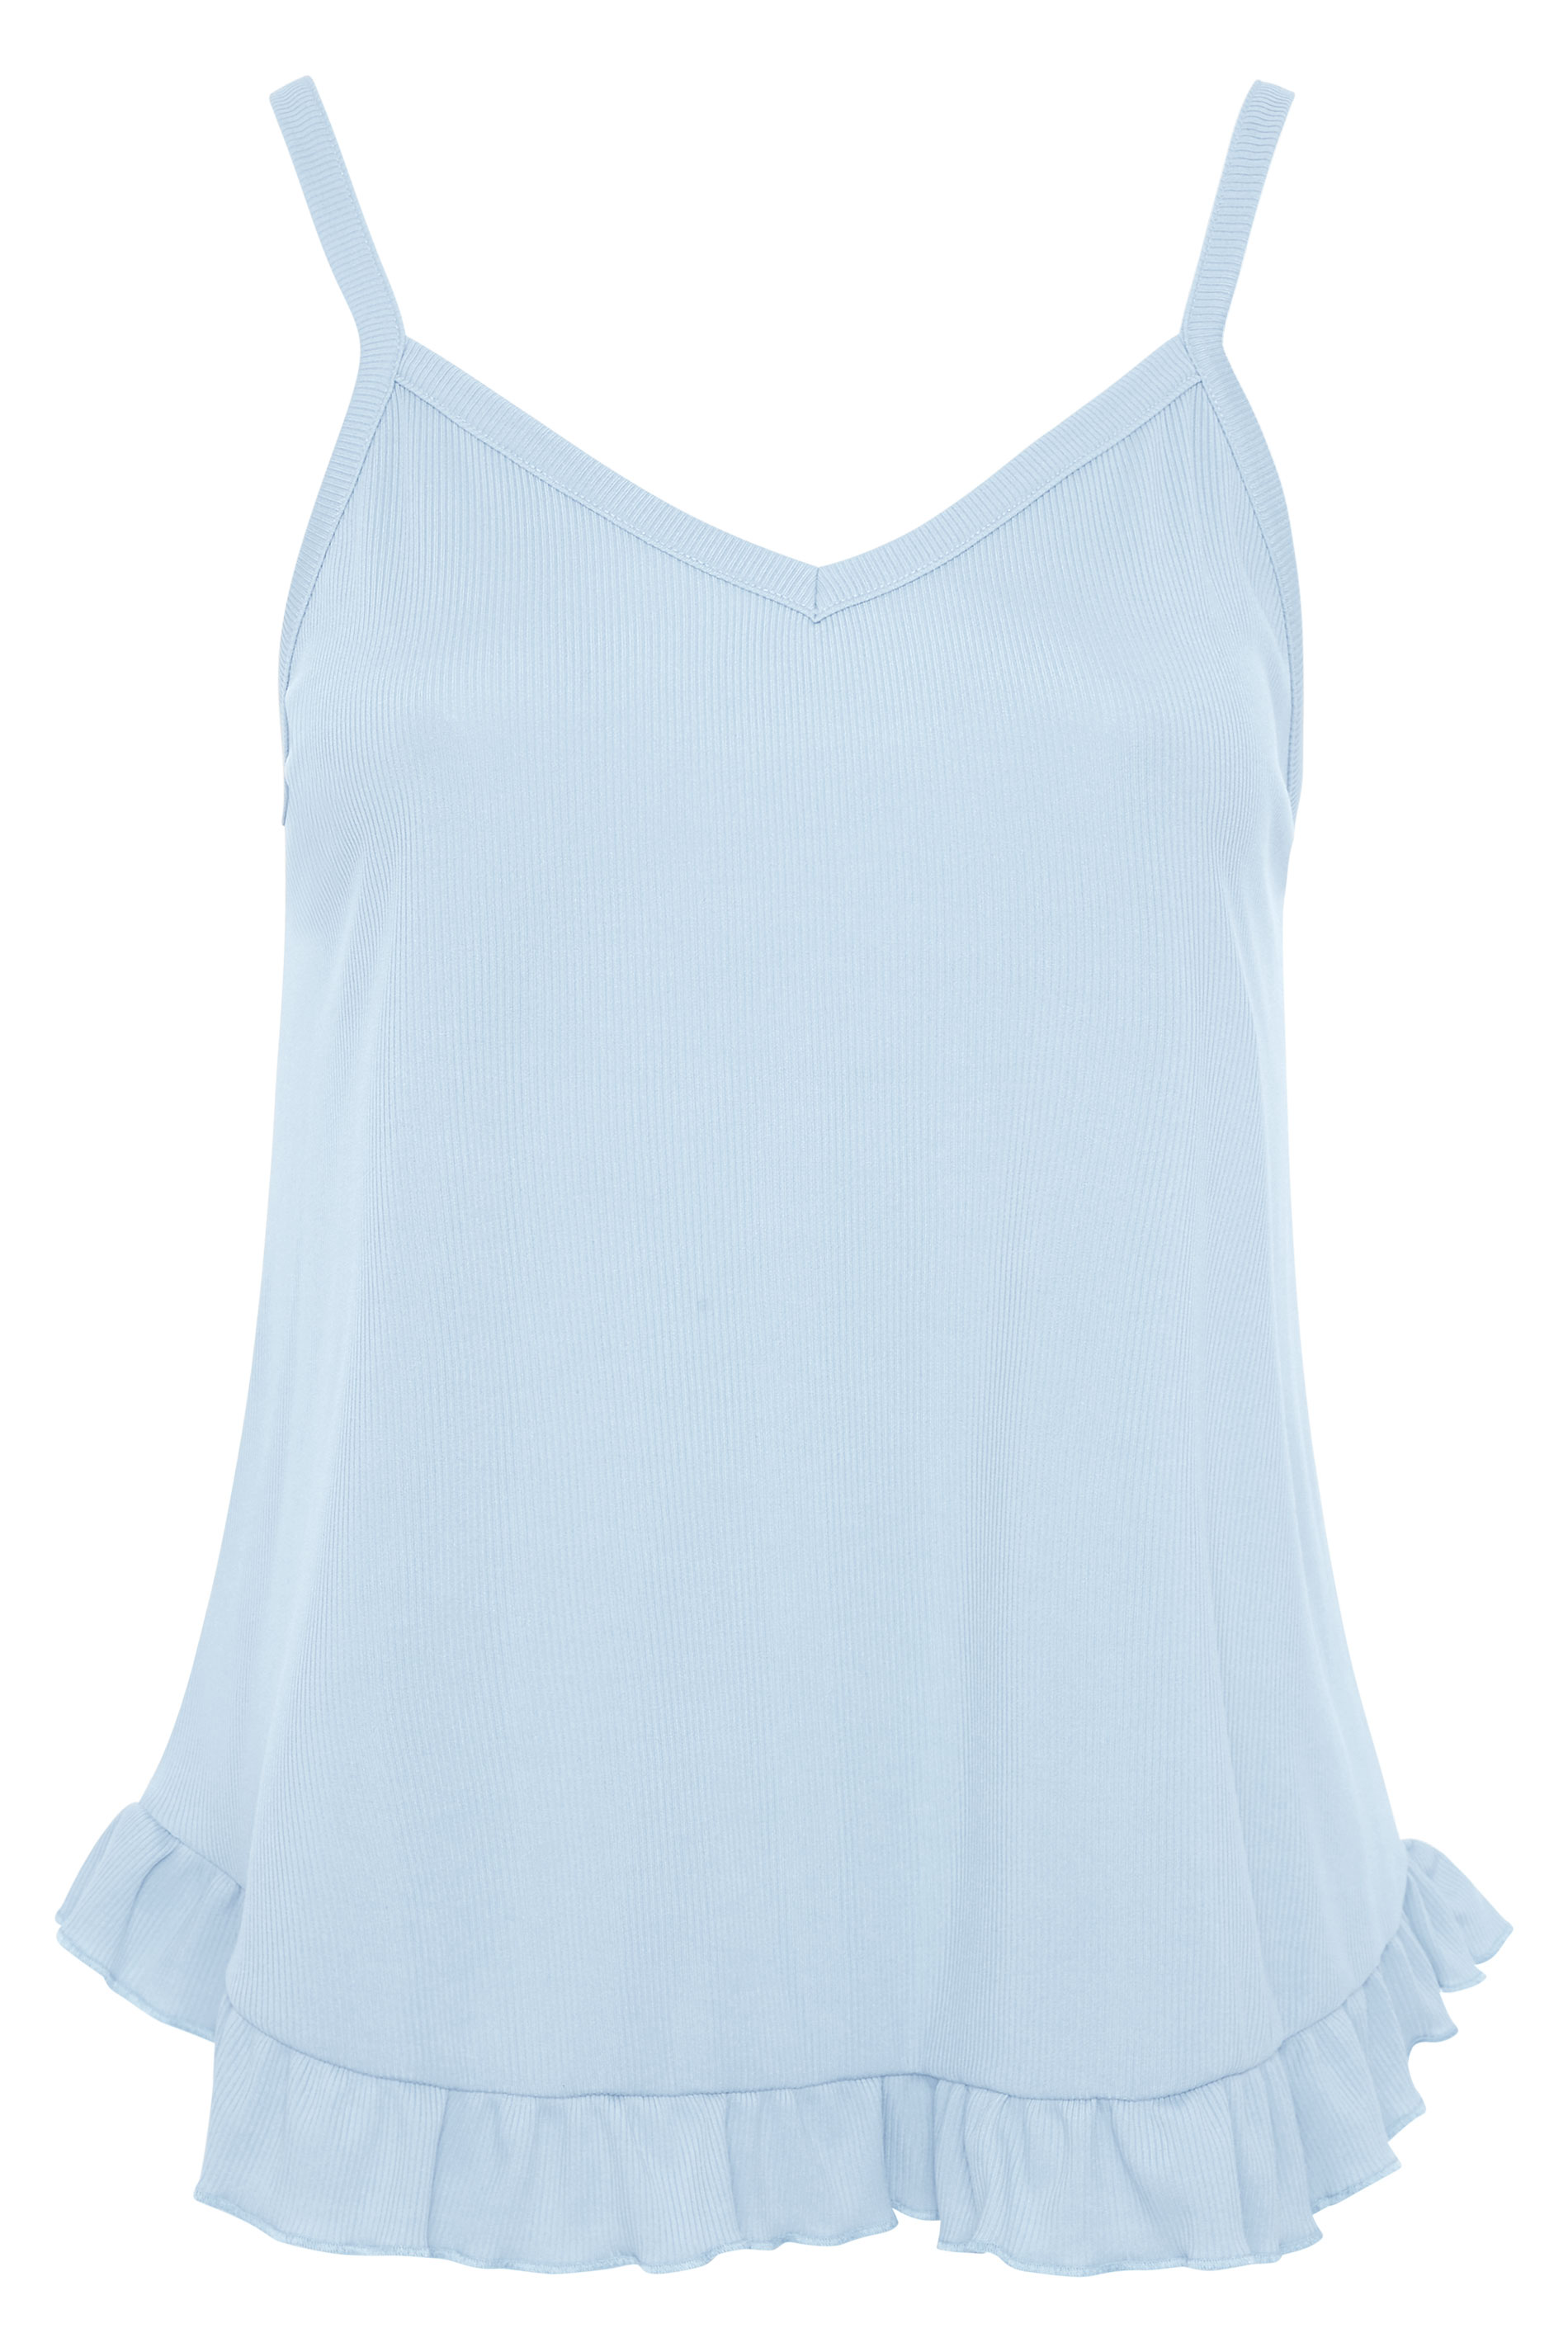 LIMITED COLLECTION Light Blue Frill Ribbed Pyjama Top | Yours Clothing